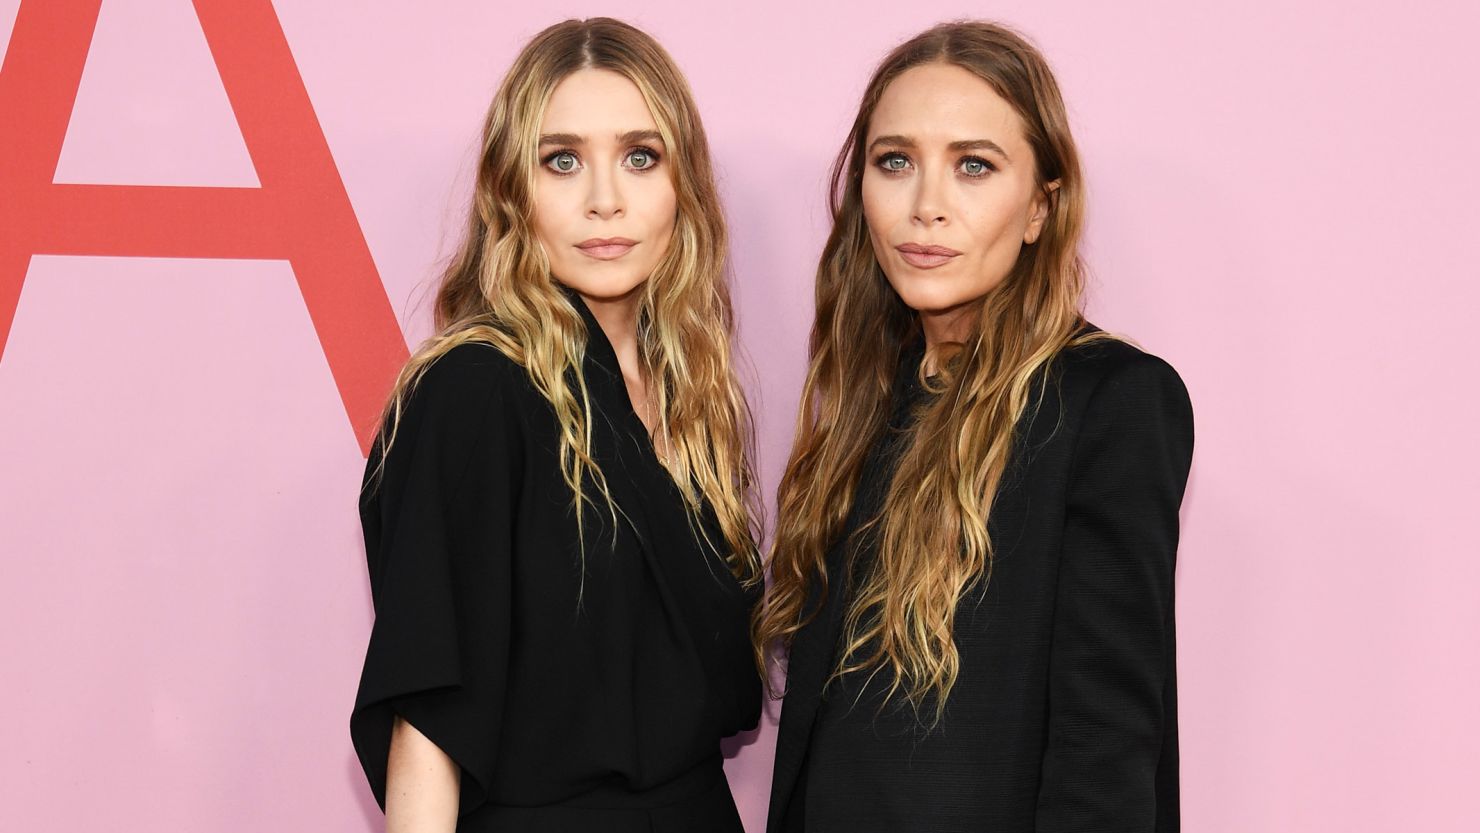 Ashley and Mary-Kate Olsen, seen here in 2019, did an interview in honor of the 15th anniversary of their fashion line.